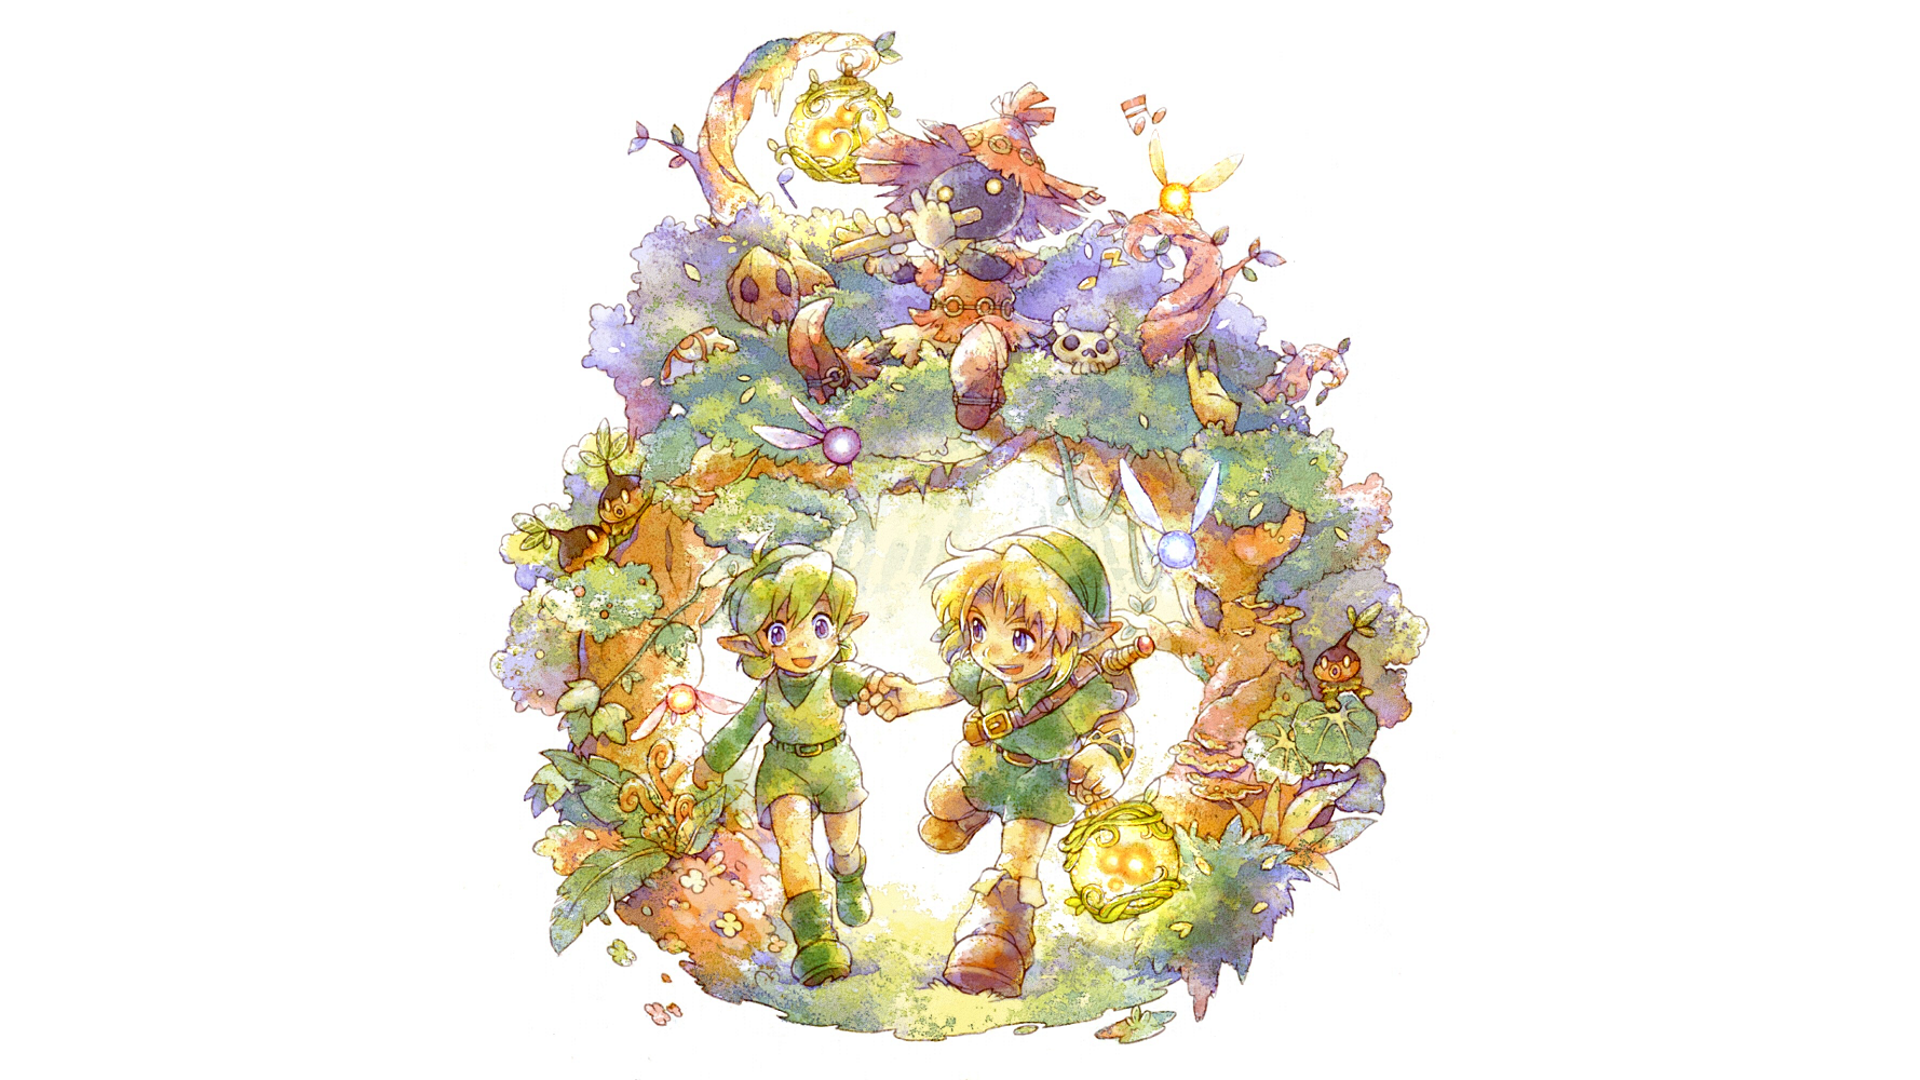 Link Saria Skull Kid The Legend Of Zelda Watercolor Anime Lost Woods White Background 1920x1080